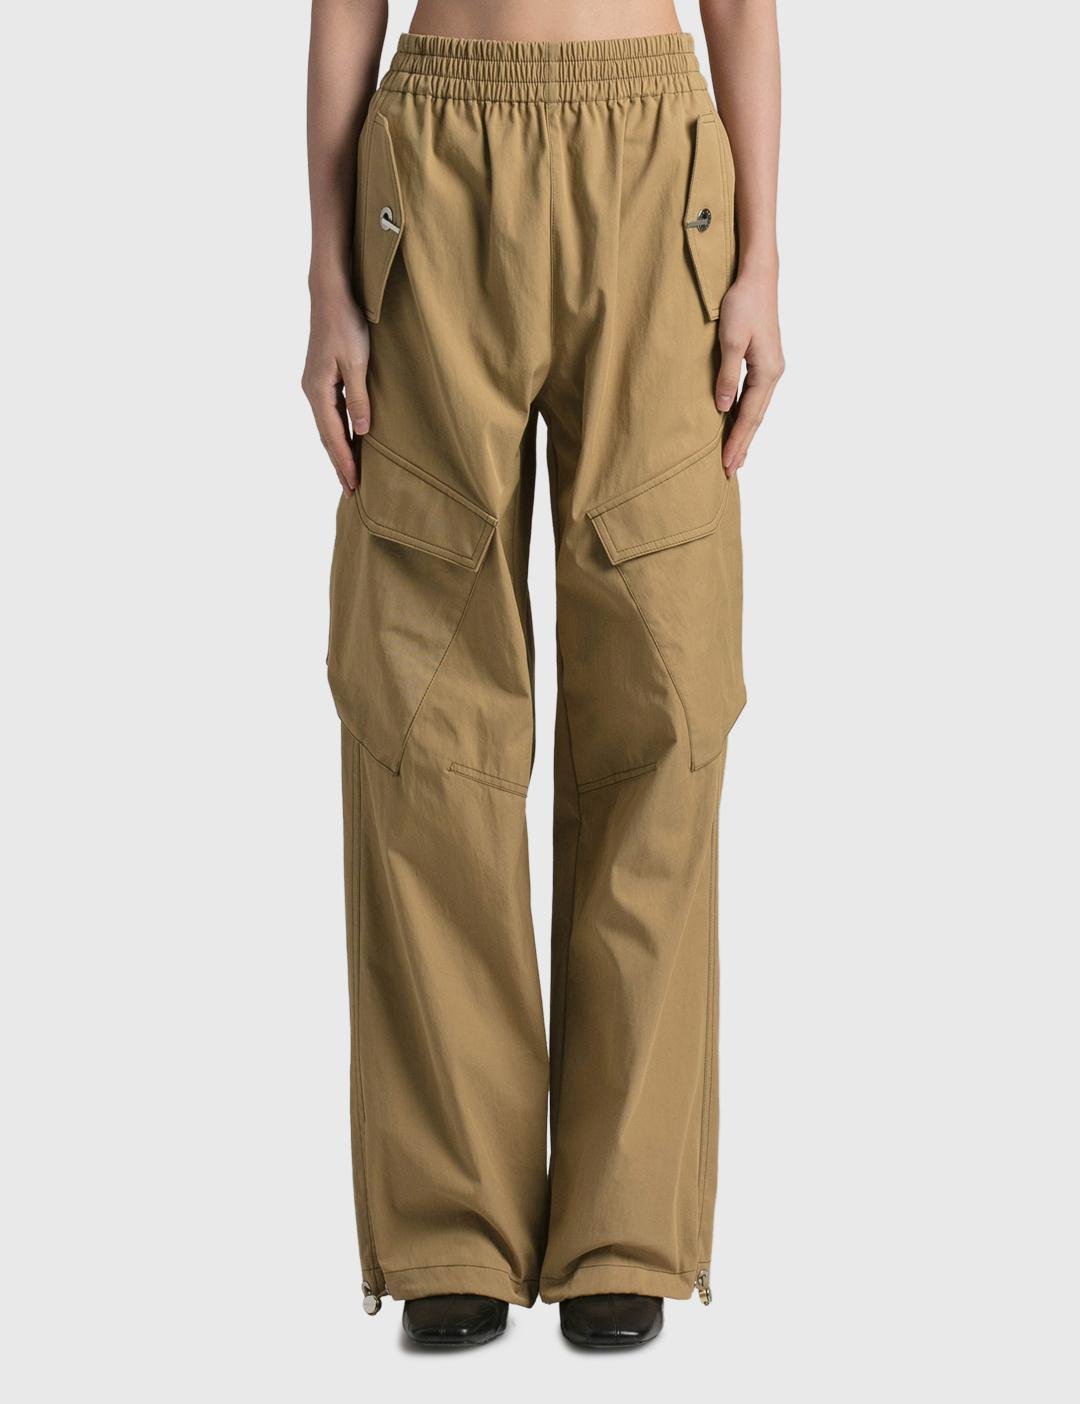 Latch Cargo Pants by DION LEE